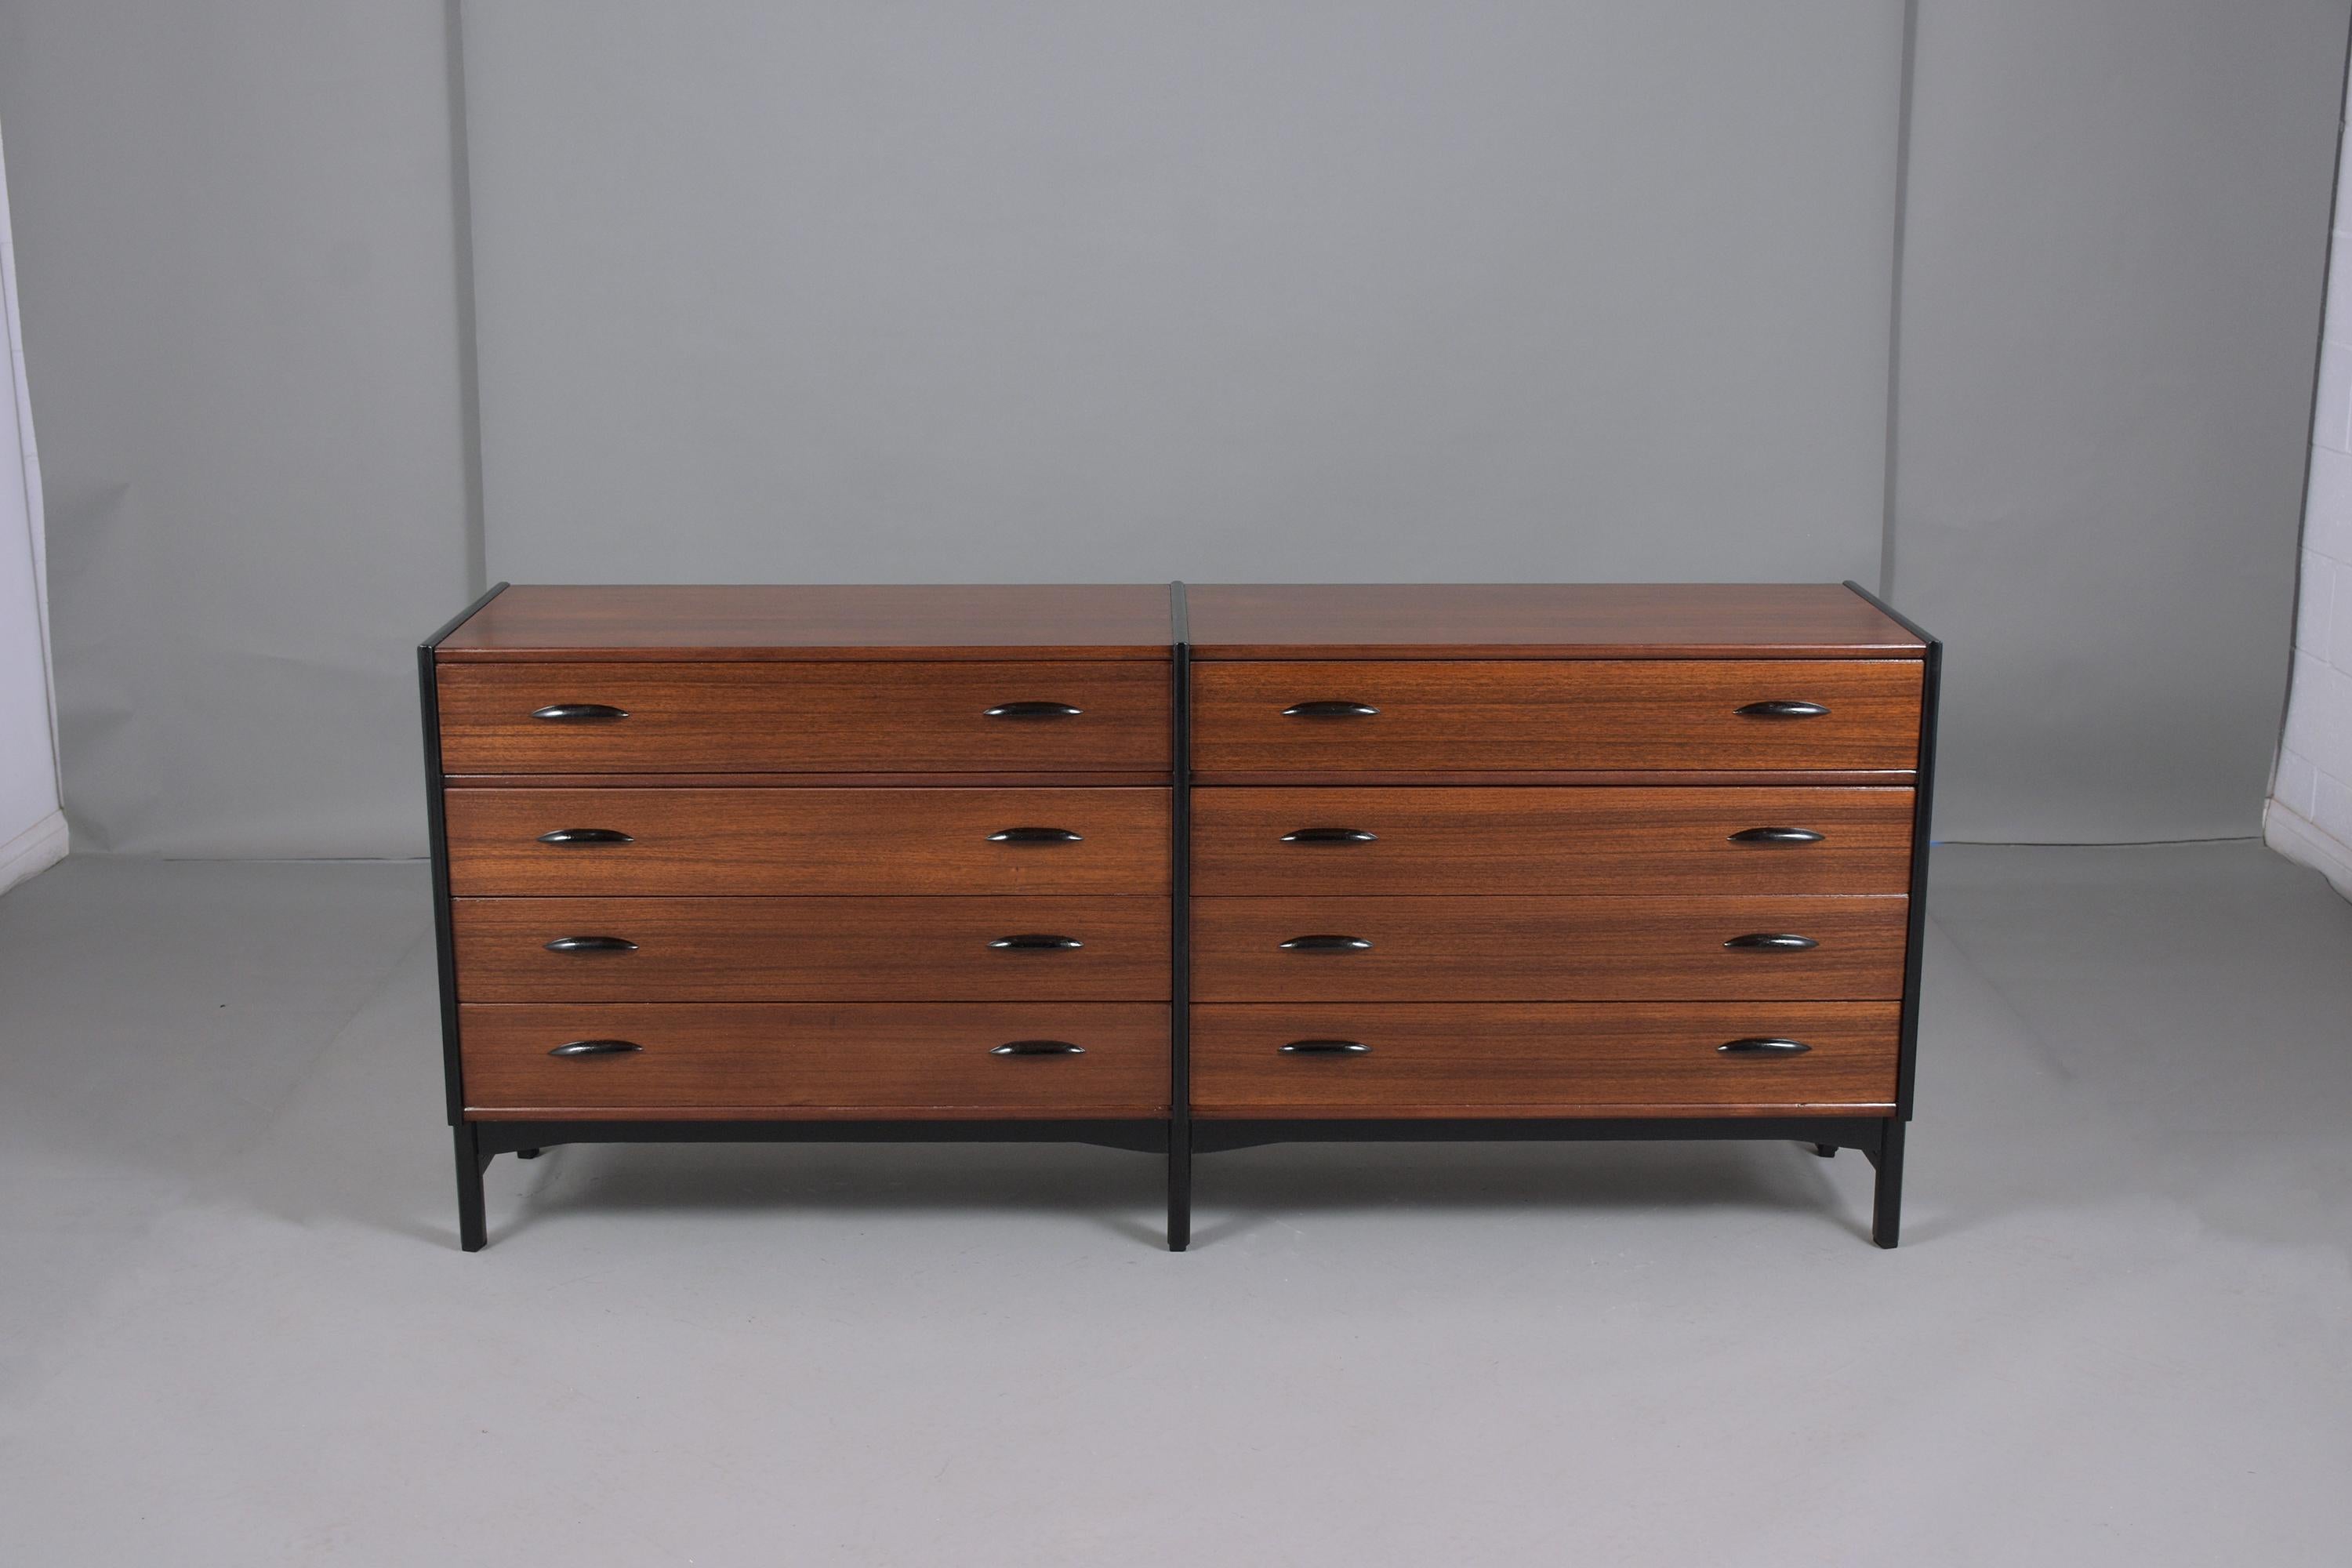 Exceptional vintage 1960S Danish chest of drawers hand-crafted out of mahogany wood fully restored by our craftsman professional team. This double dresser has been newly stained in rich mahogany color with ebonized combination details. Has eight